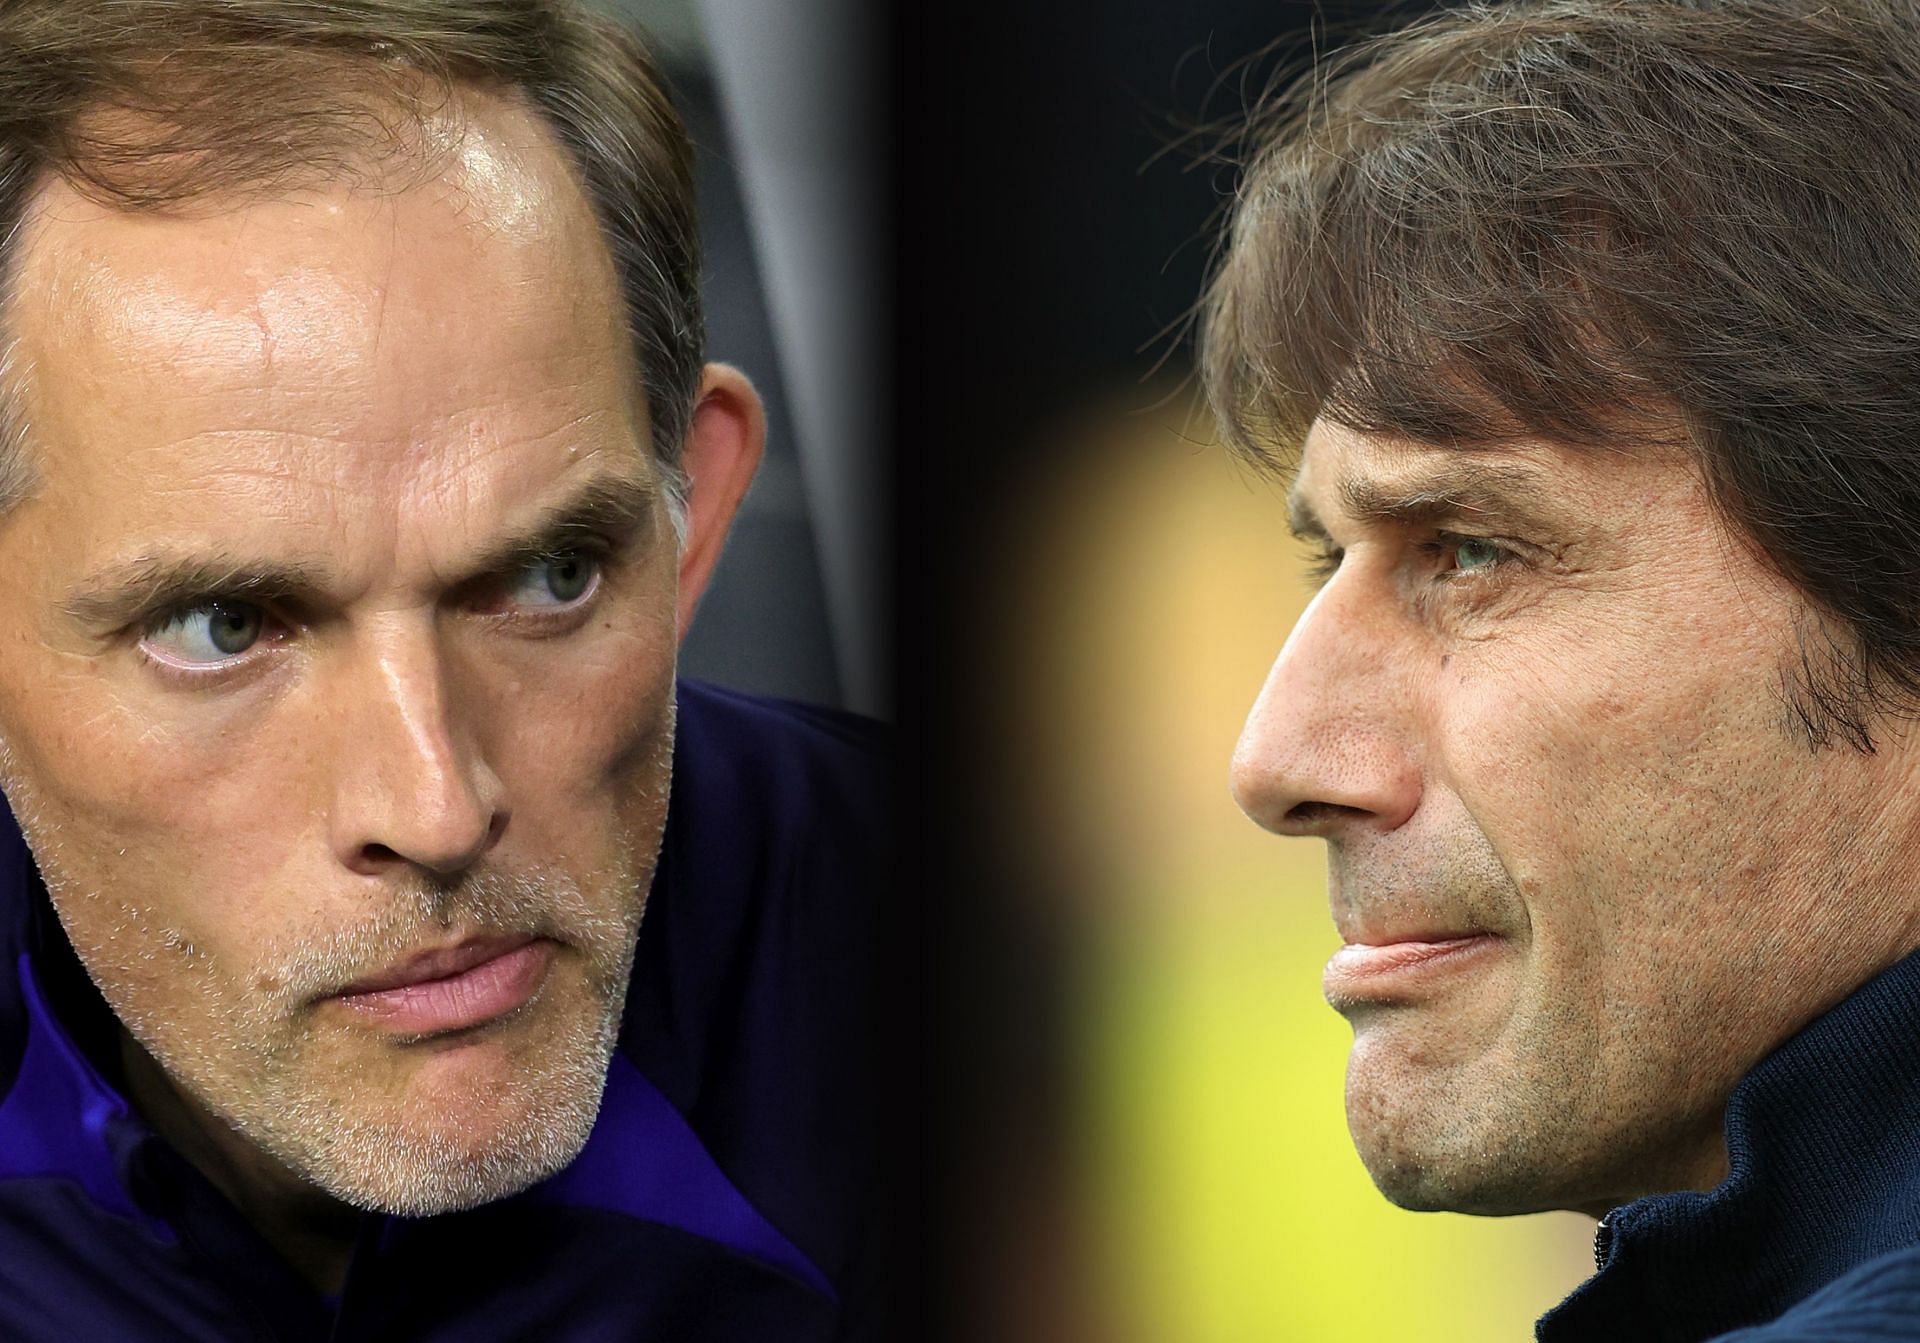 Tuchel and Conte face a one-match ban following their altercation on Sunday.